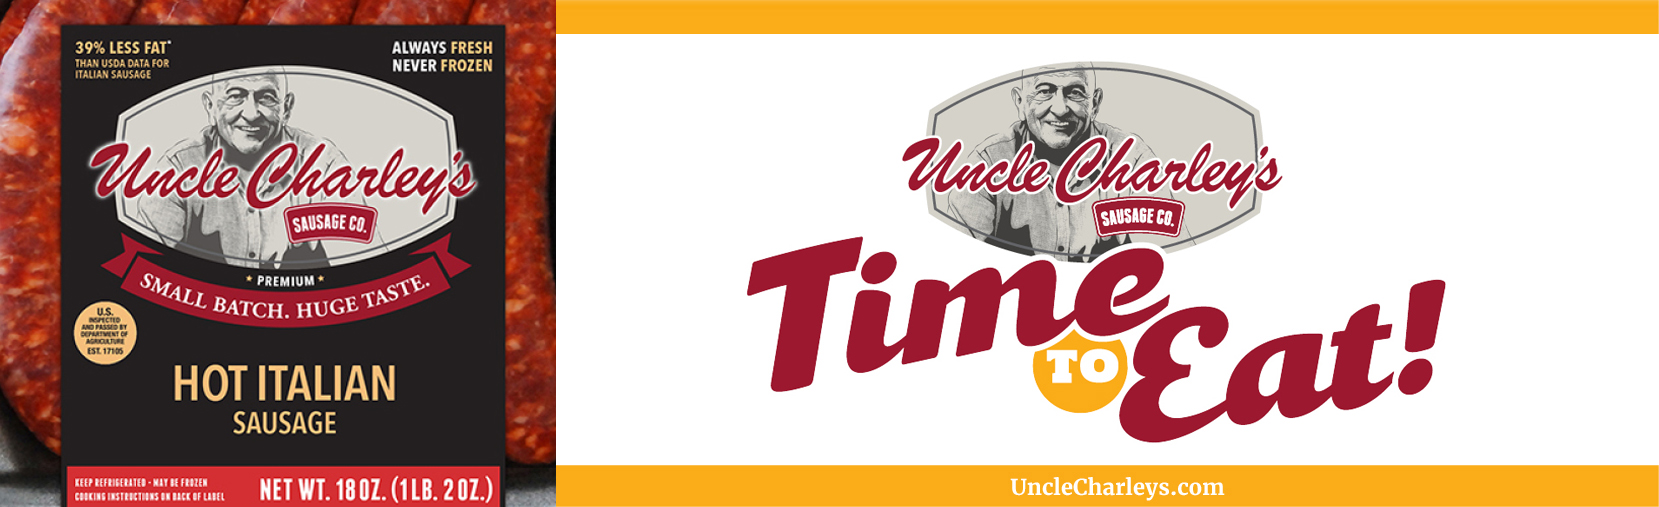 Uncle Charleys Time to Eat Campaign